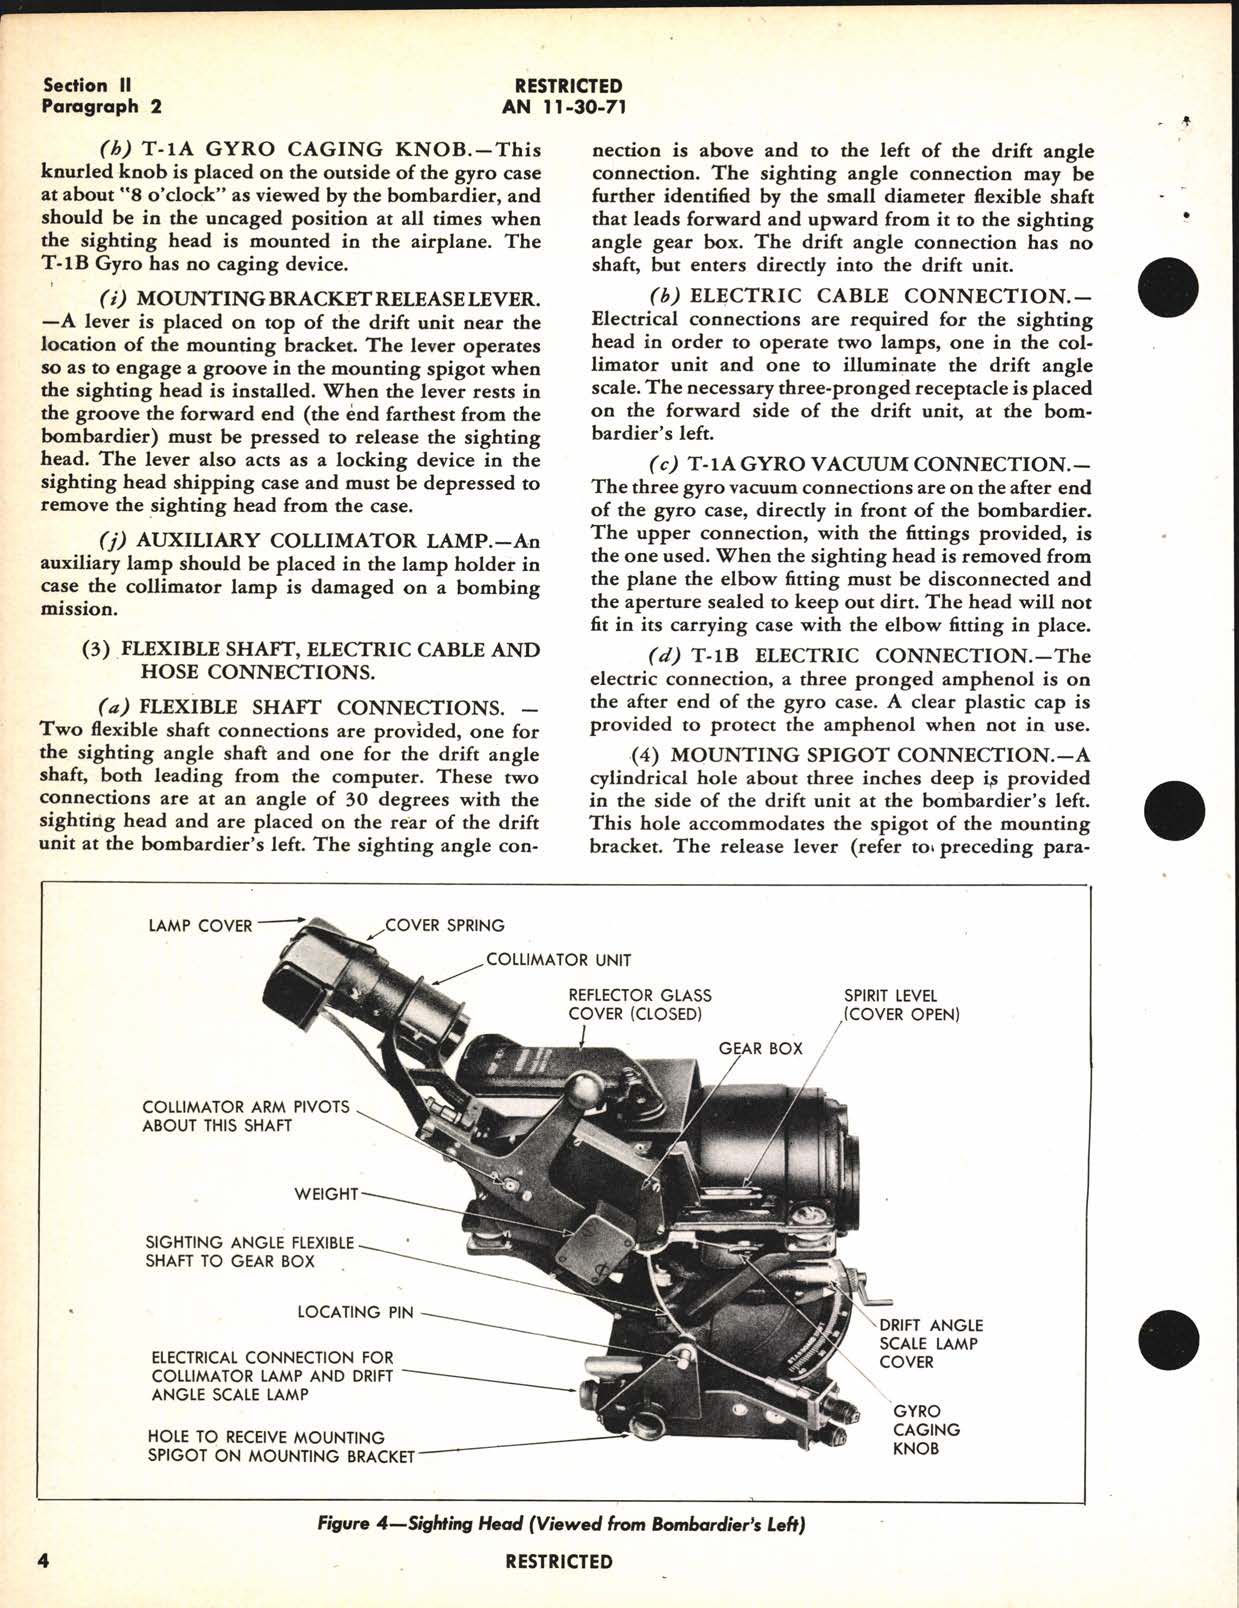 Sample page 8 from AirCorps Library document: Handbook of Instructions with Parts Catalog for Bombsights Types T-1A and T-1B